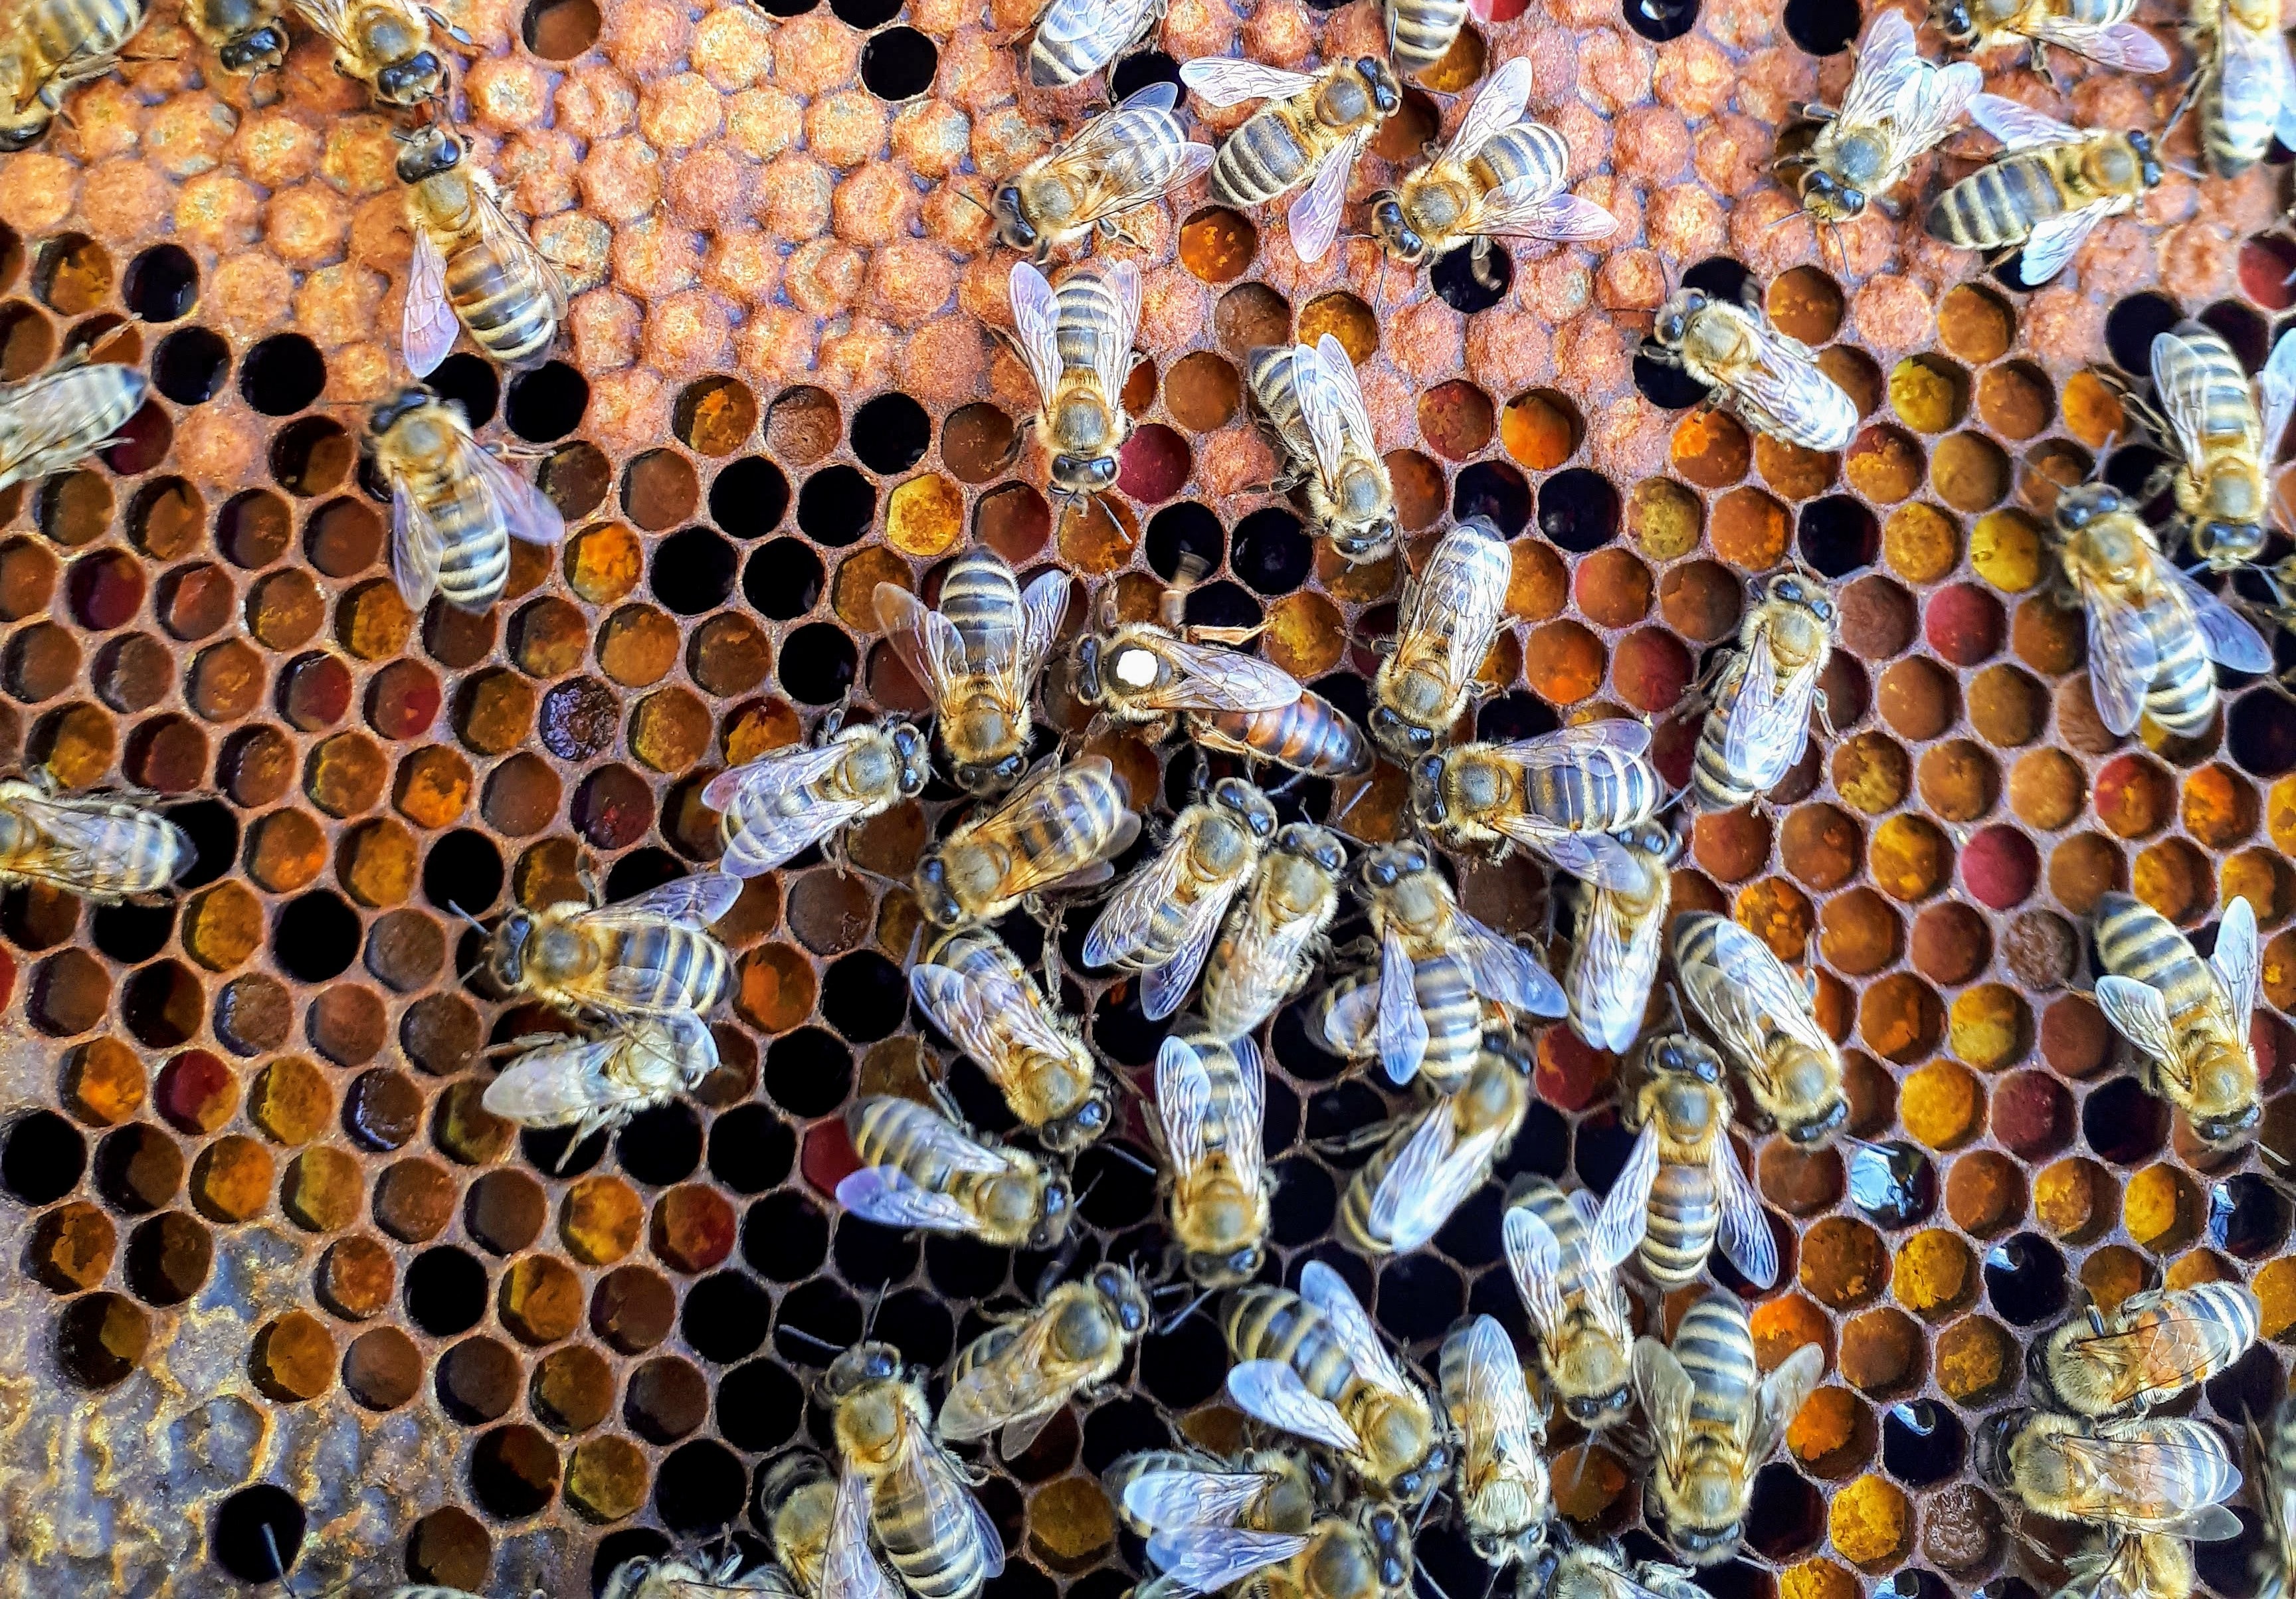 photograph of bees in a beehive